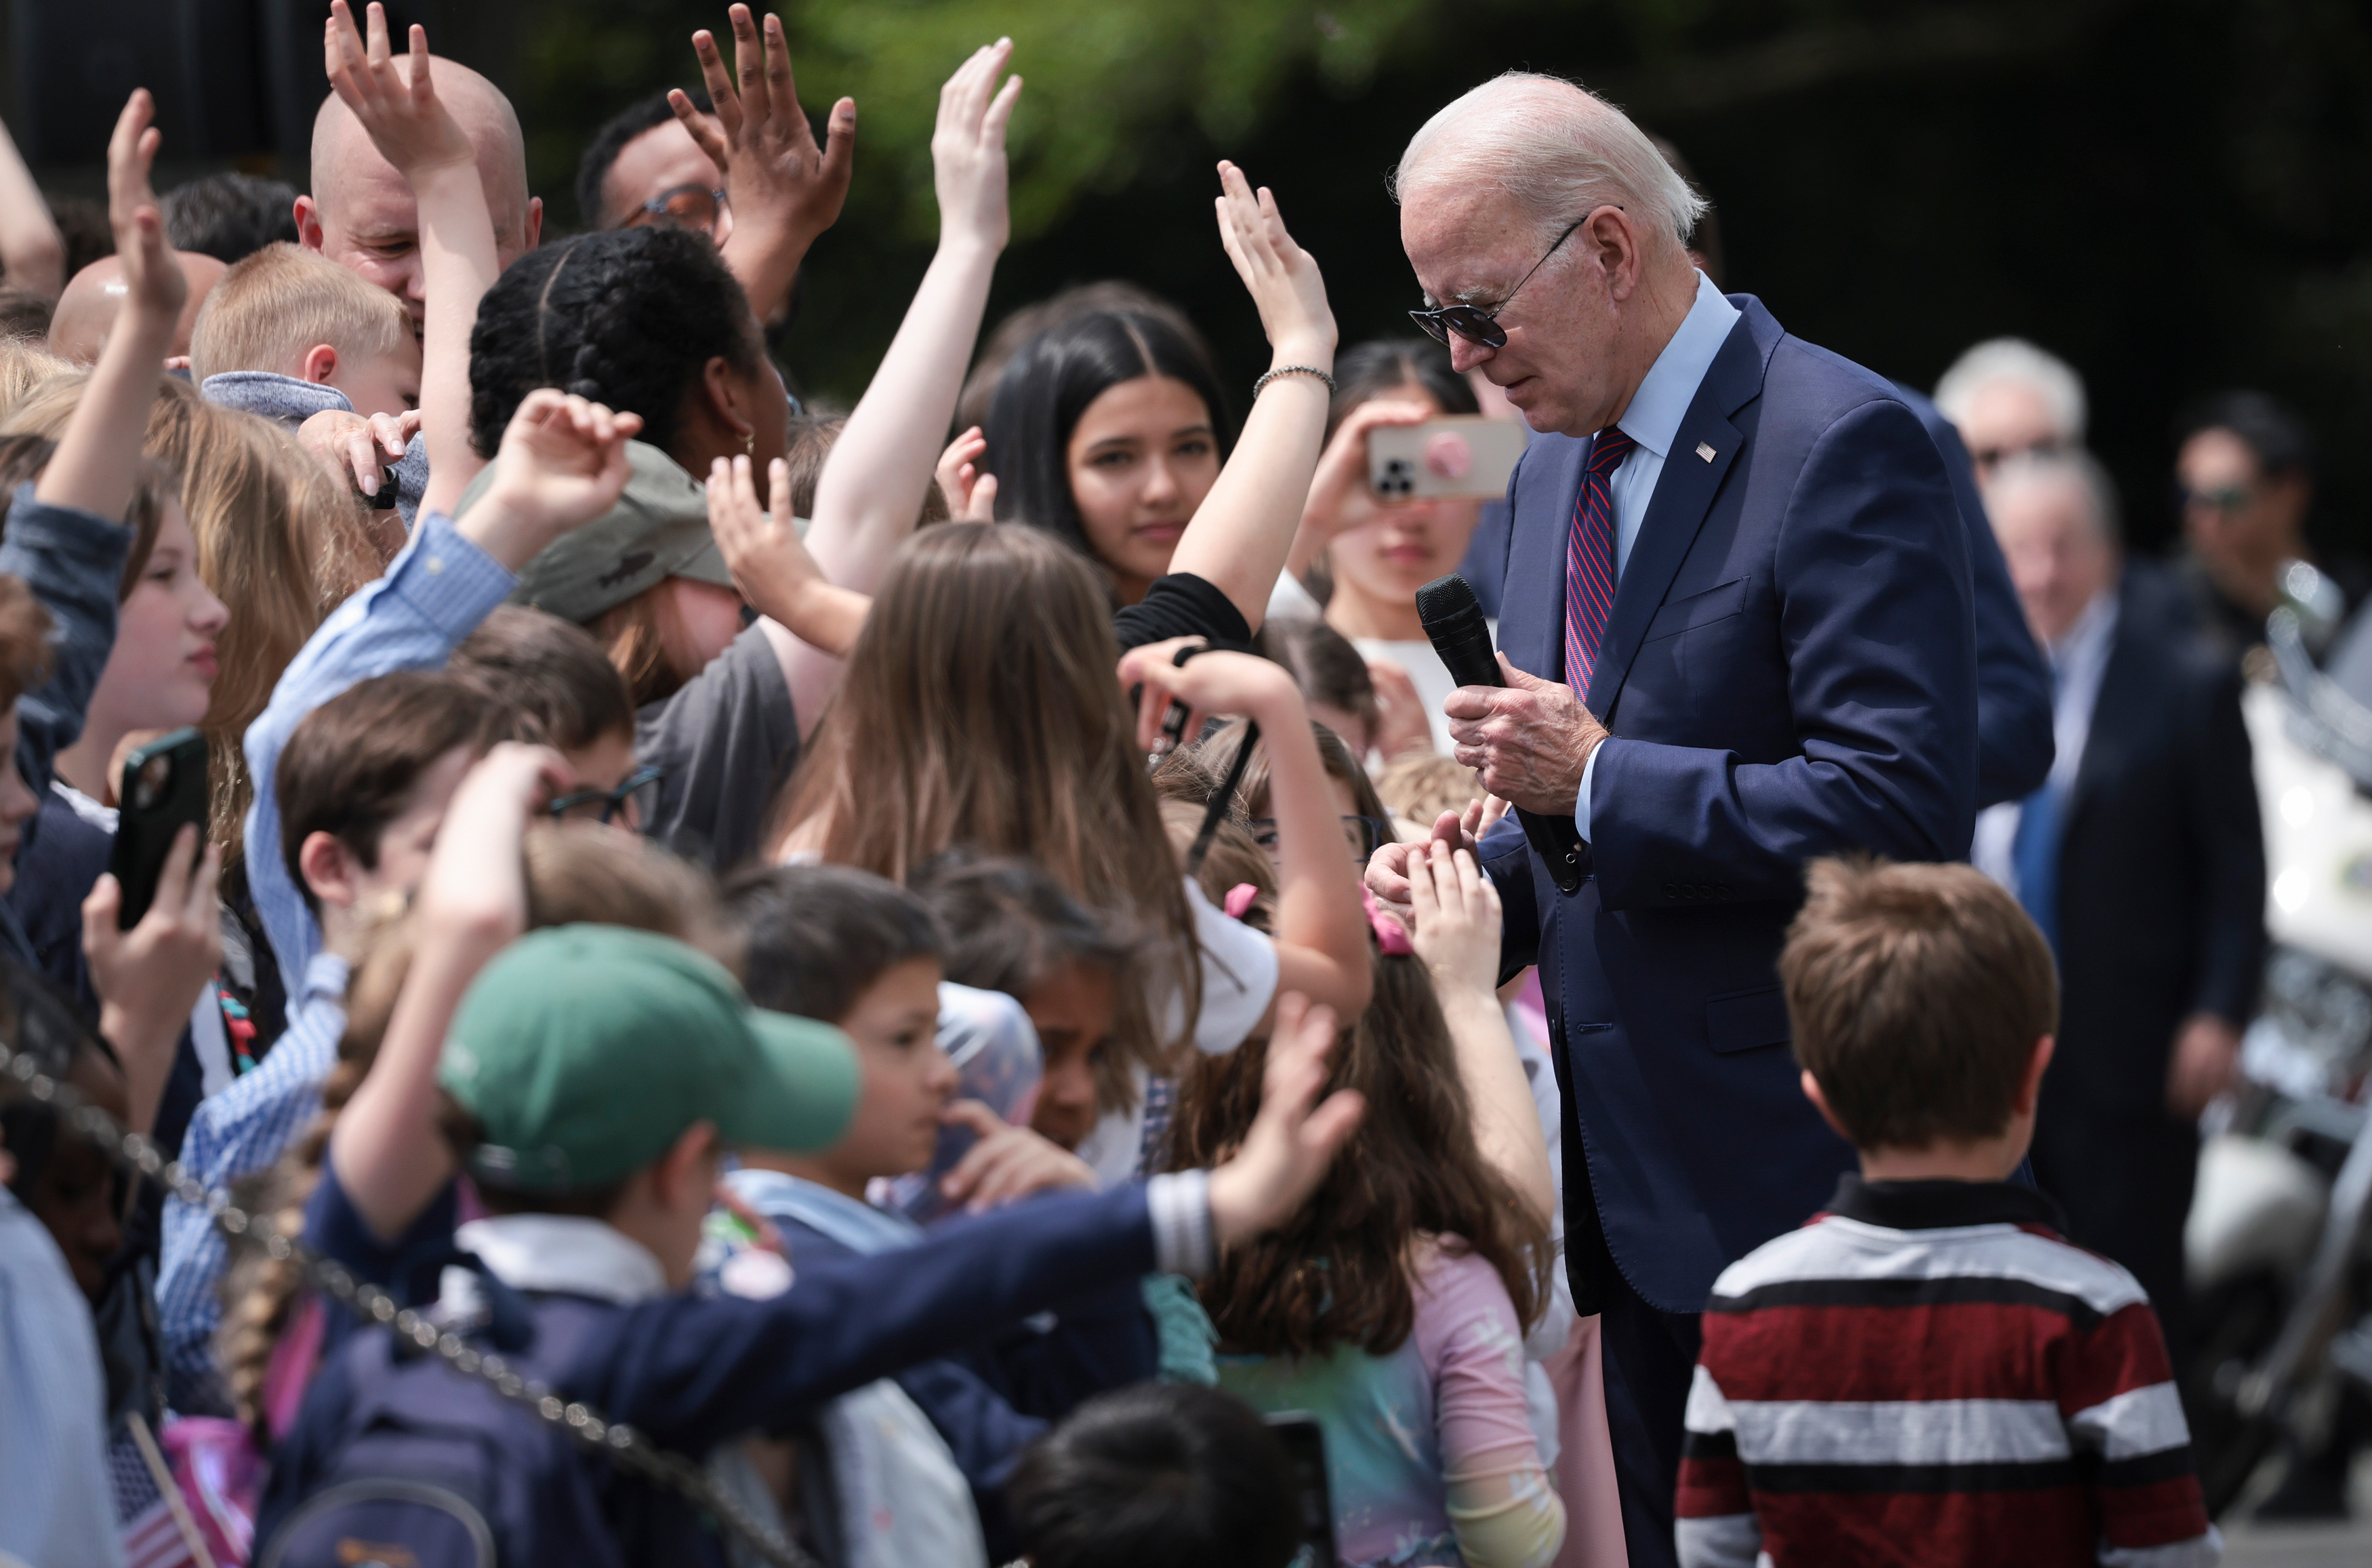 Biden Gets a Little Help With Gaffes While Hosting Kids at the White House